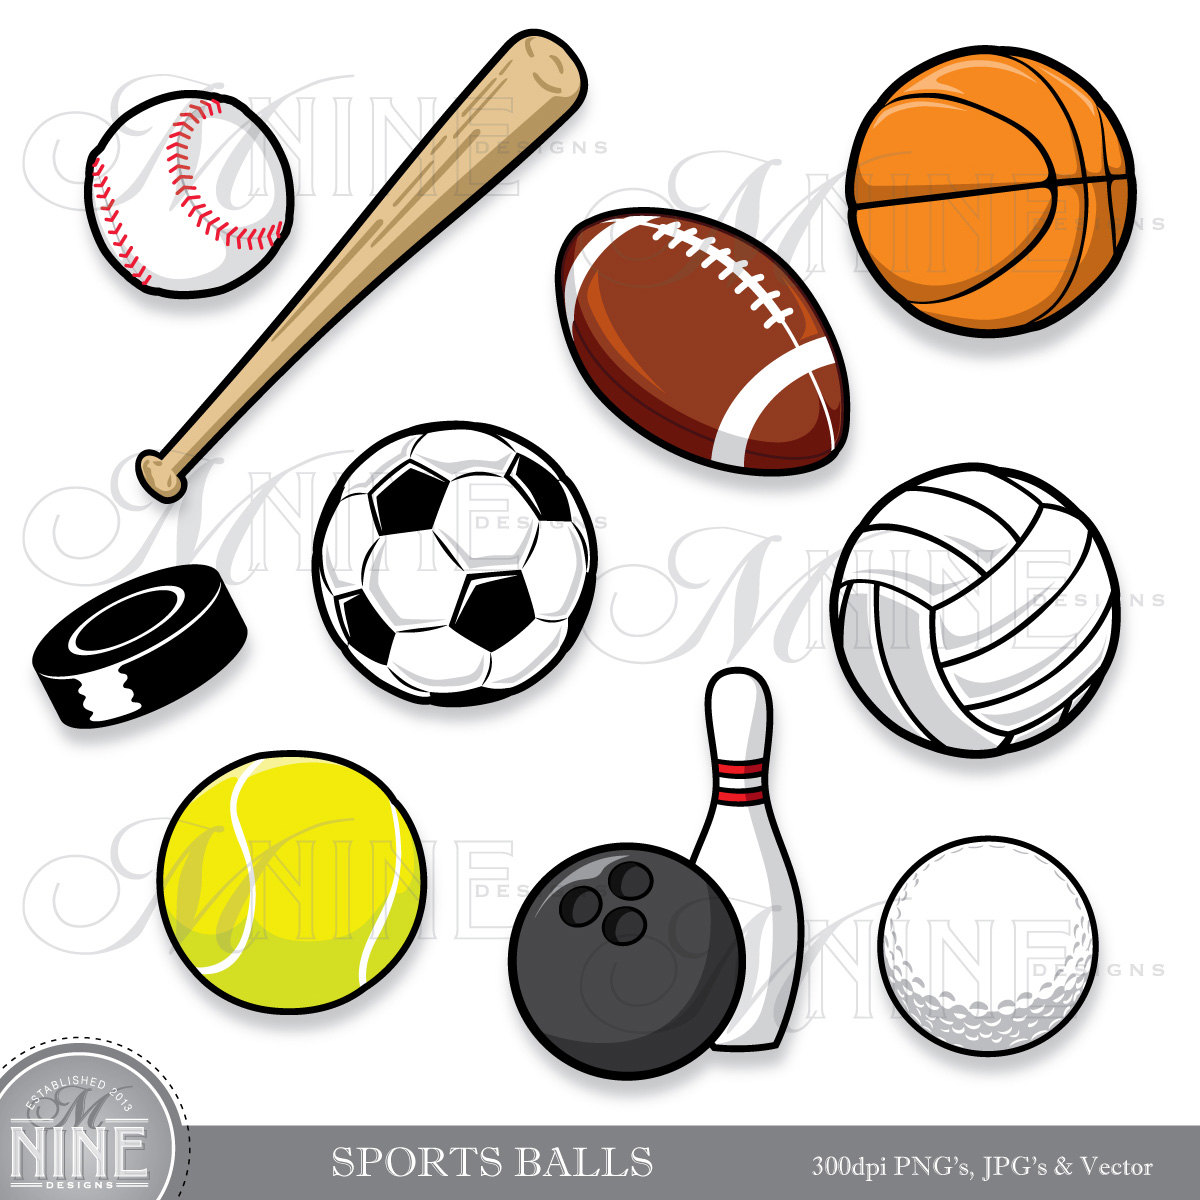 Sports clipart.  - Clipart Sports